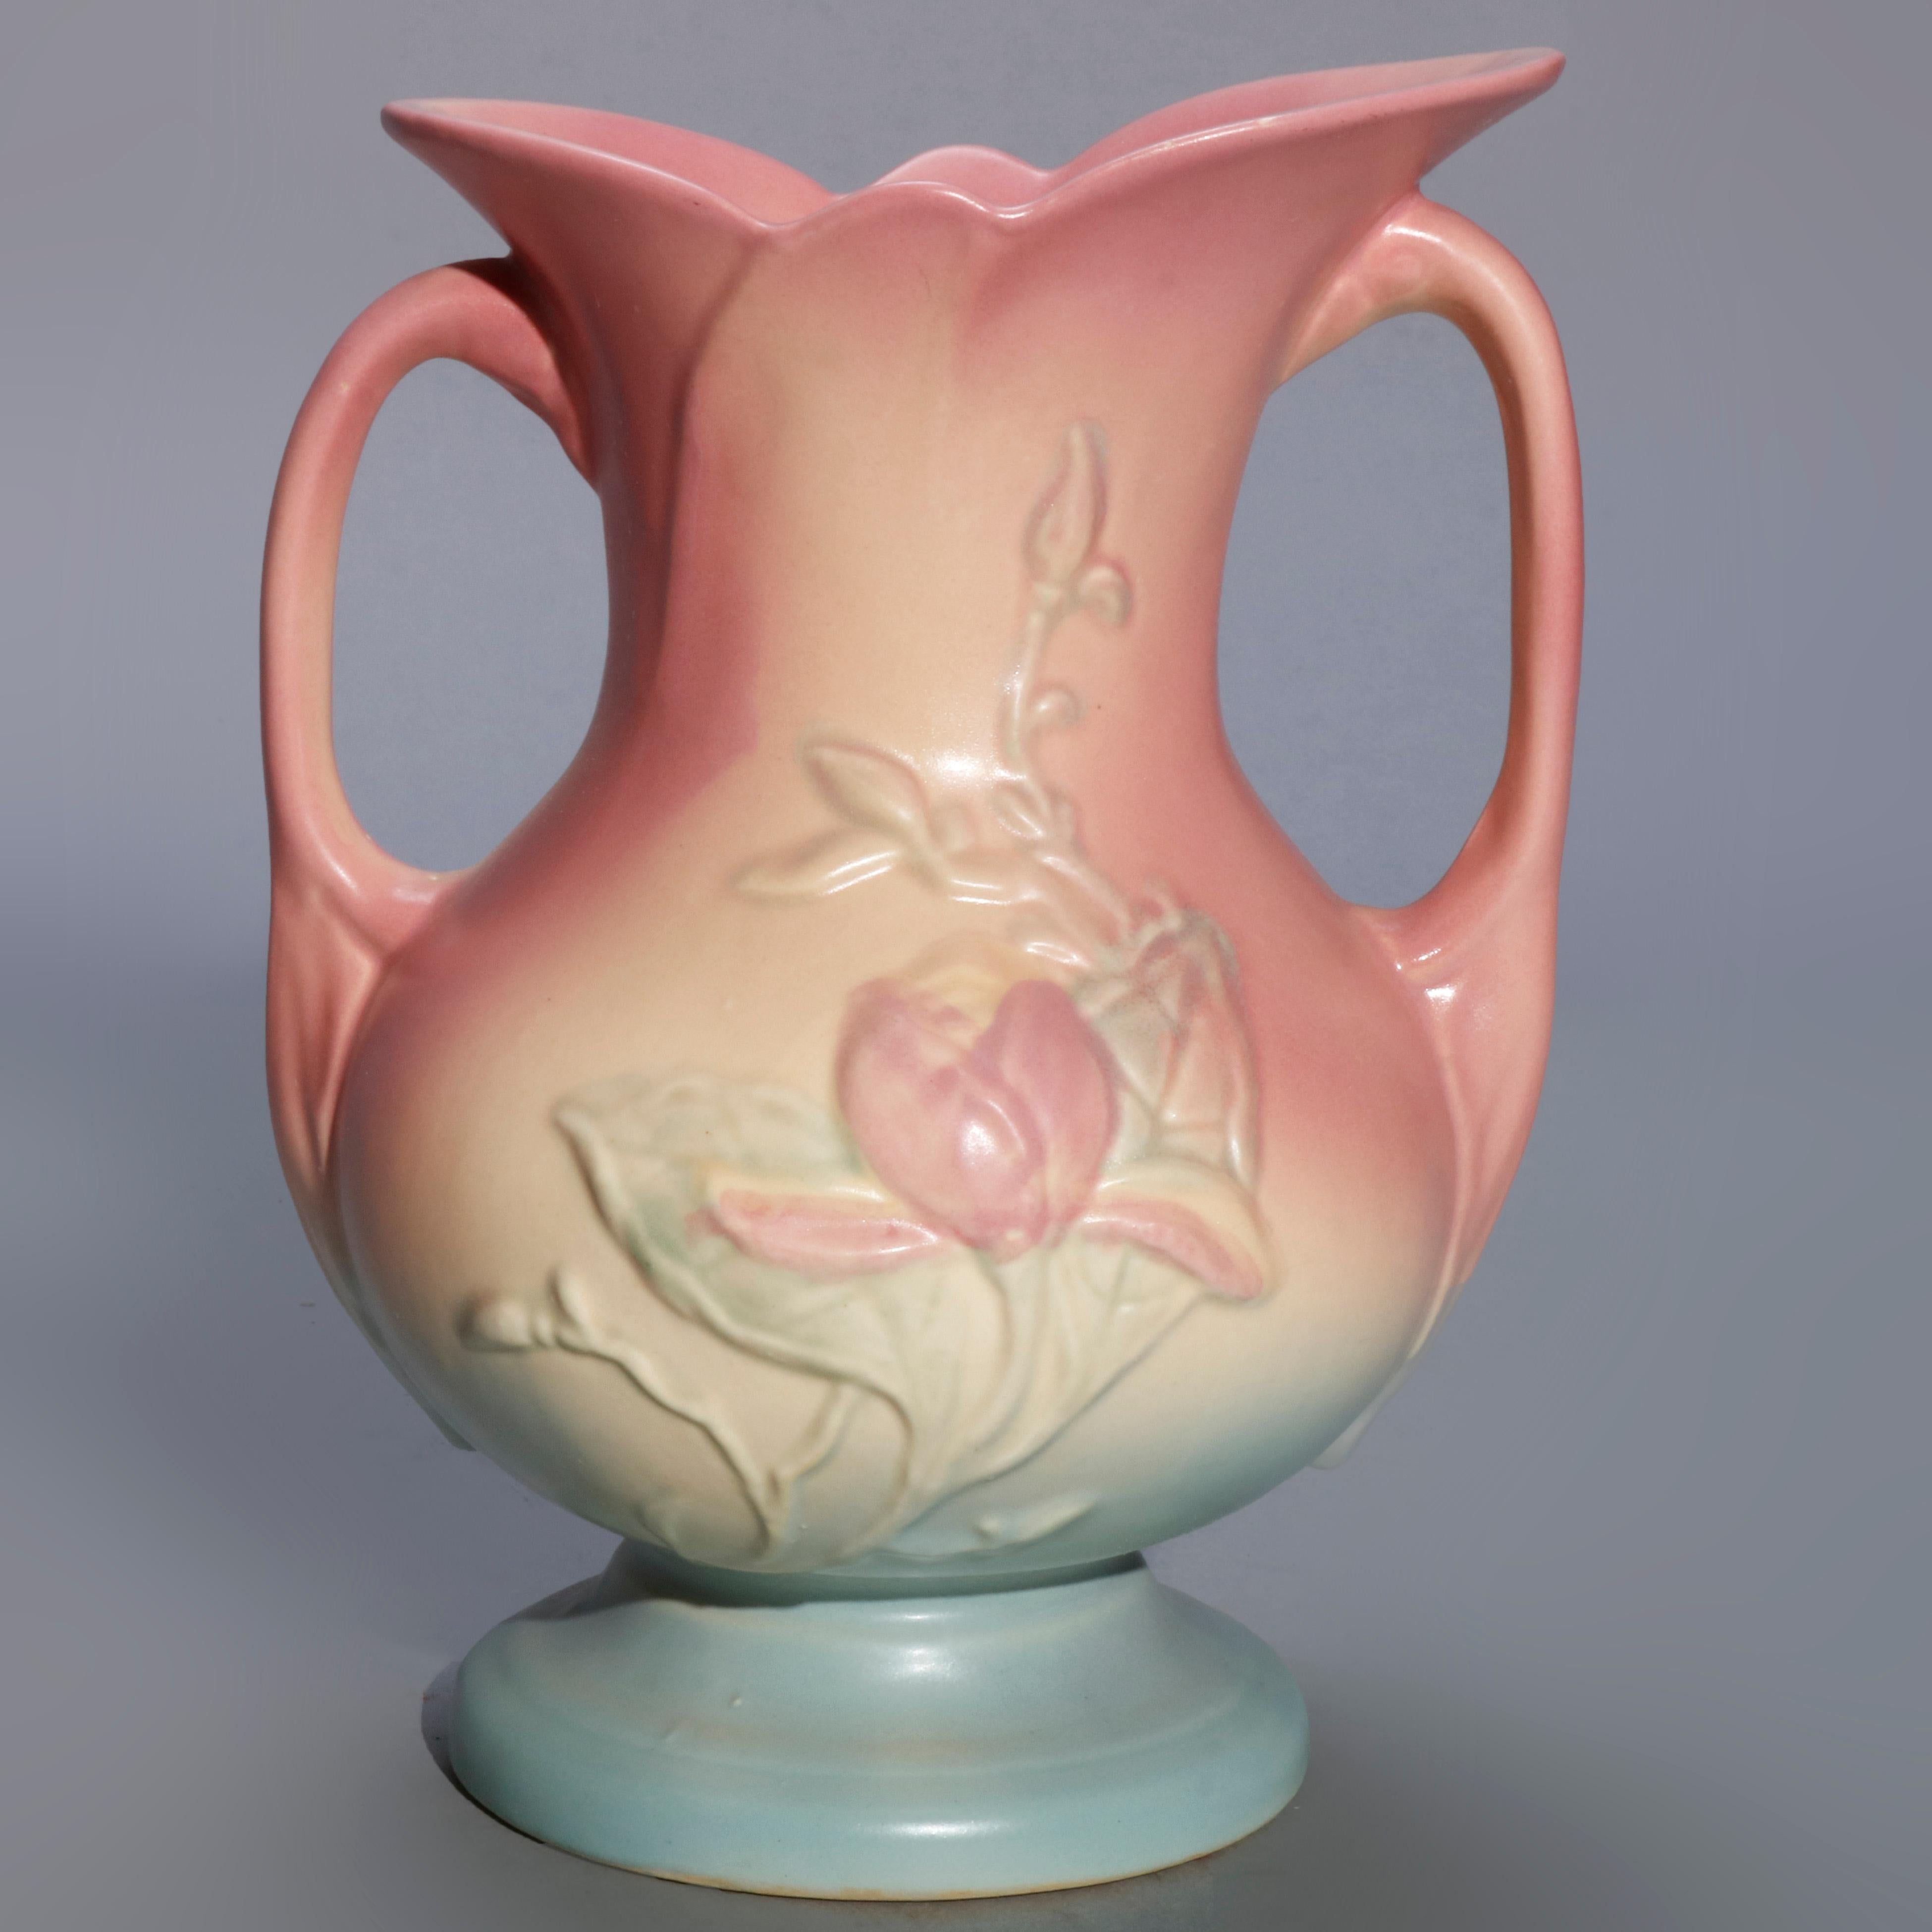 A pair of vintage Hull art pottery double handled bow knot vases offer tulip form mouth with floral decorated body having double scroll form handles, maker mark on base as photographed, circa 1940

Measures- 8.75